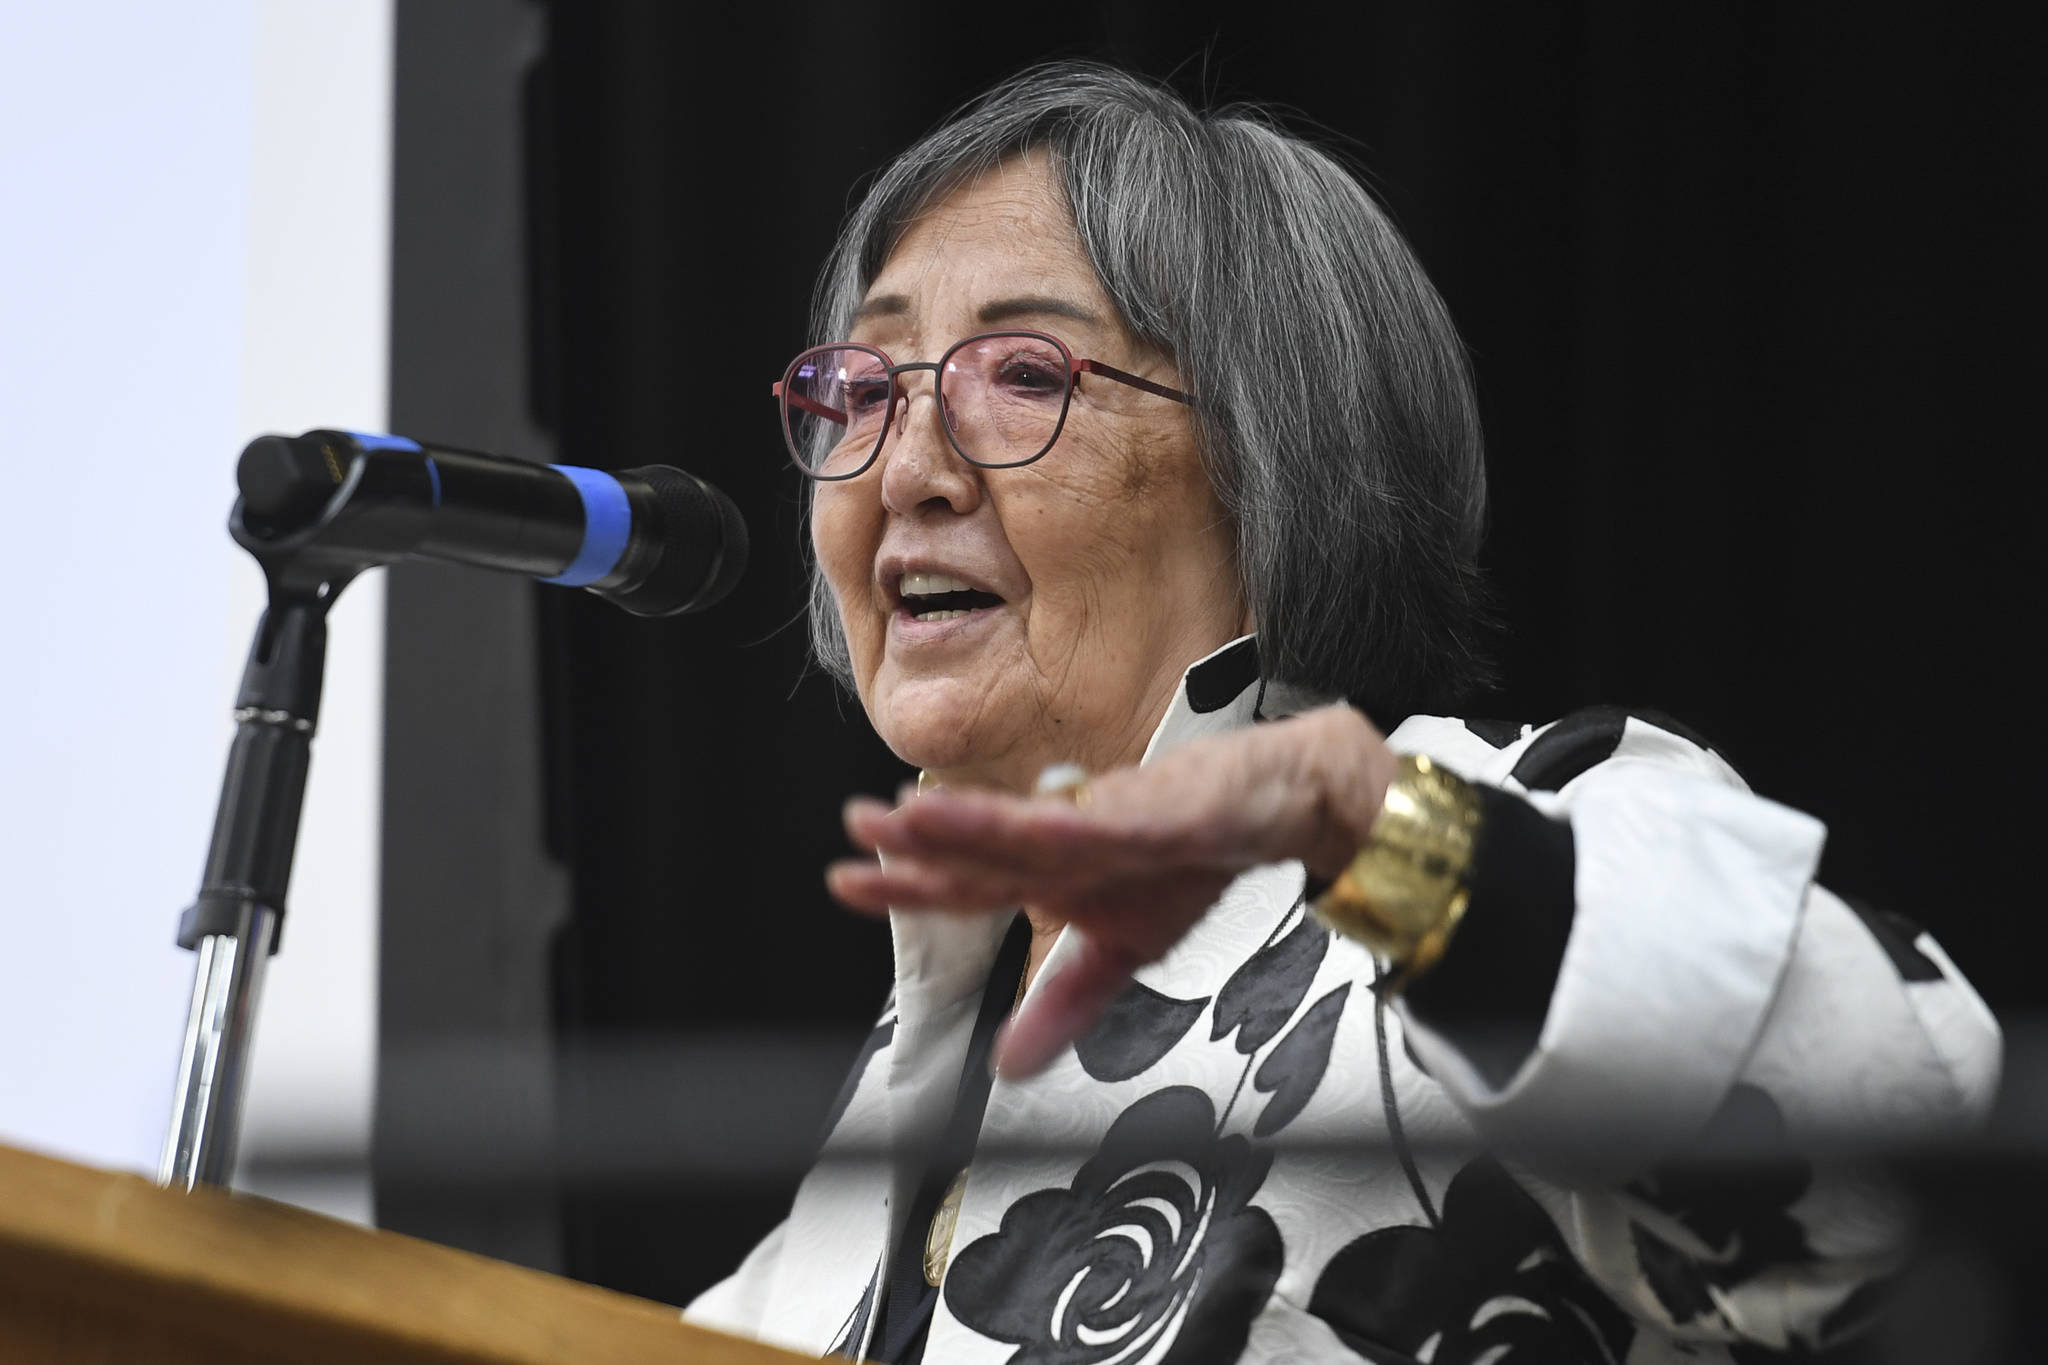 Rosita Worl, president of Sealaska Heritage Institute, gives a presentation at the “Sharing Our Knowledge” on Friday, Sept. 27, 2019, on blood quantum and how it relates to enrollment of shareholders in Native corporations. (Michael Penn | Juneau Empire)